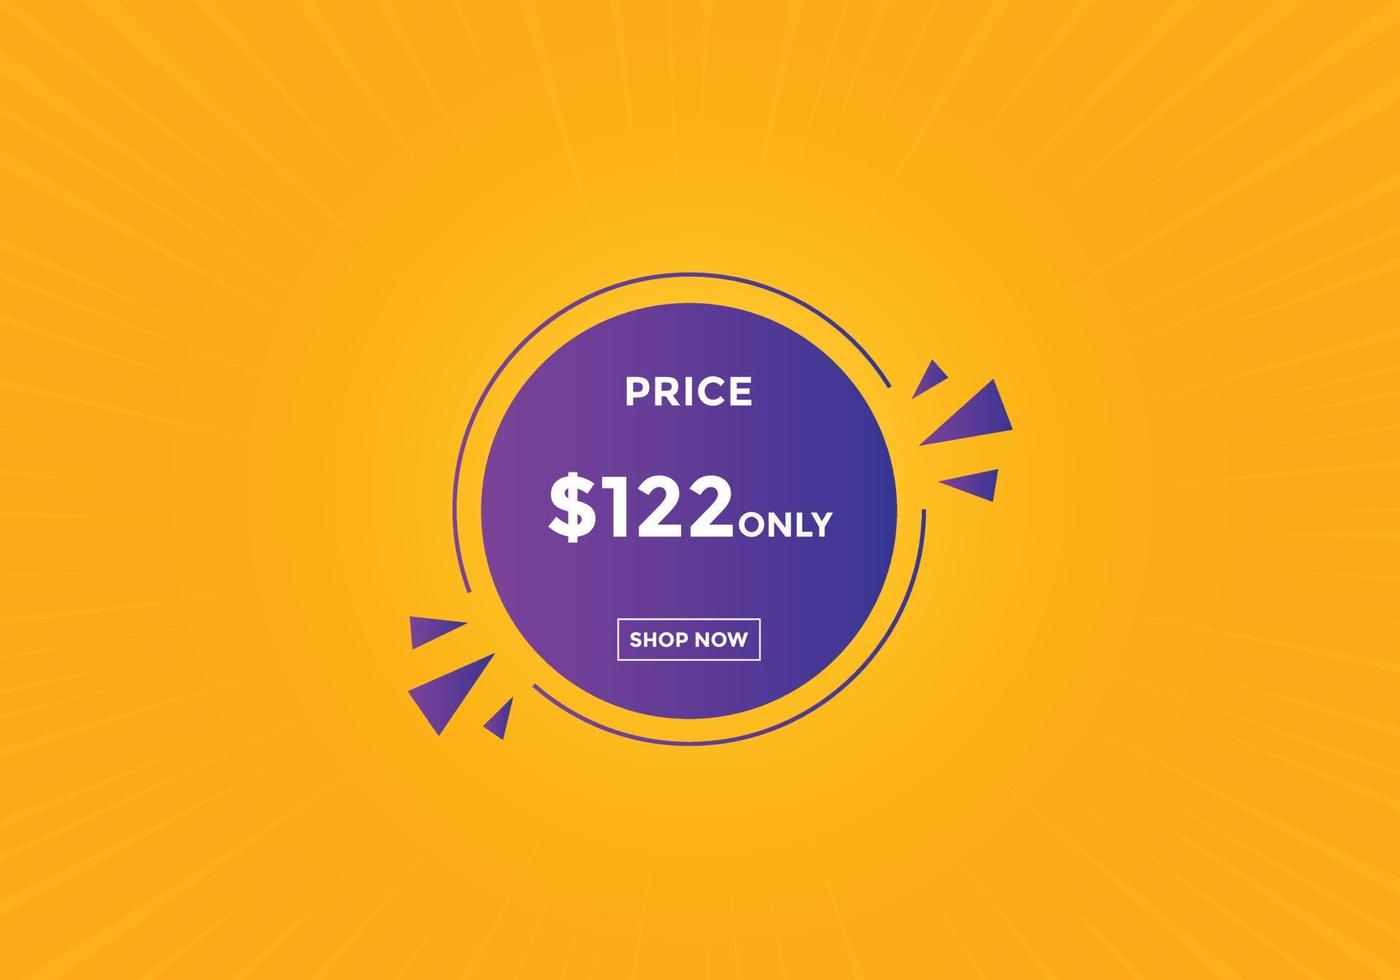 122 dollar price tag. Price 122 USD dollar only Sticker sale promotion Design. shop now button for Business or shopping promotion vector